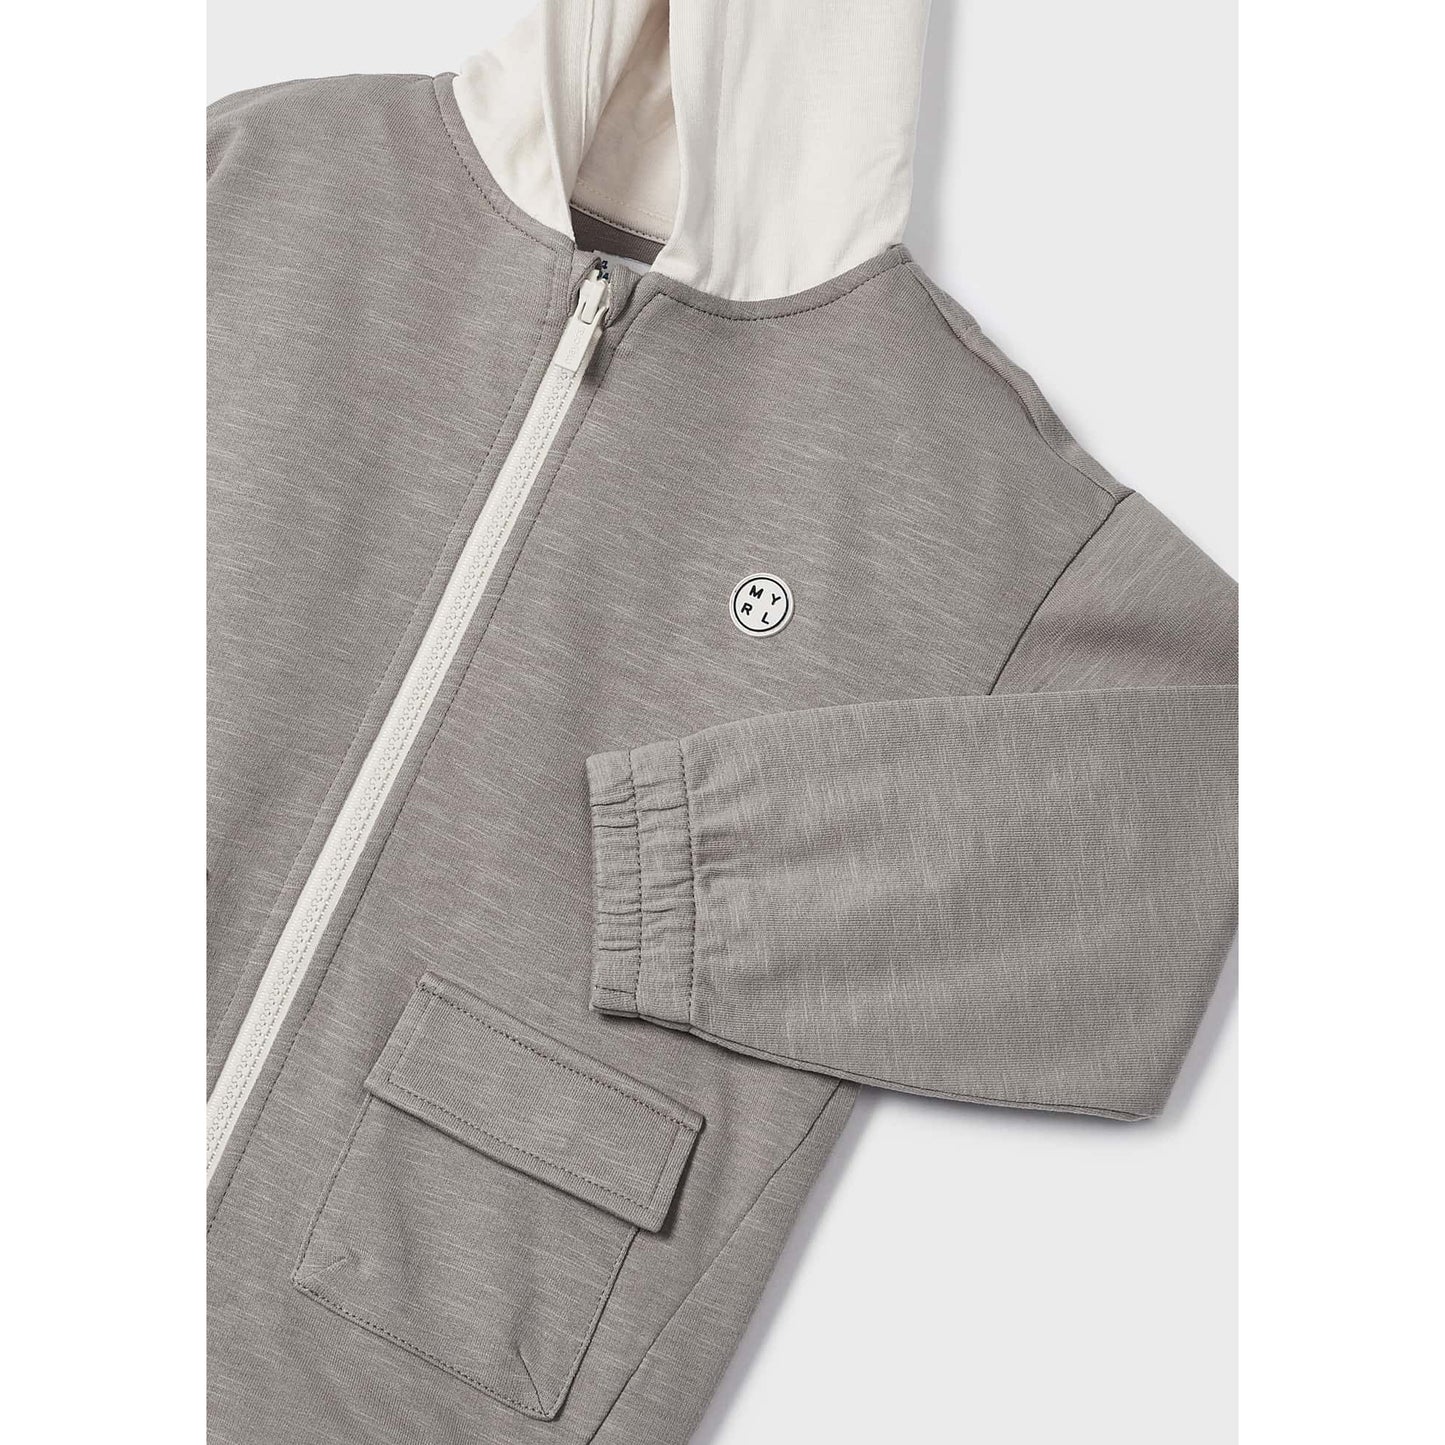 Fossil Hooded Zip Up